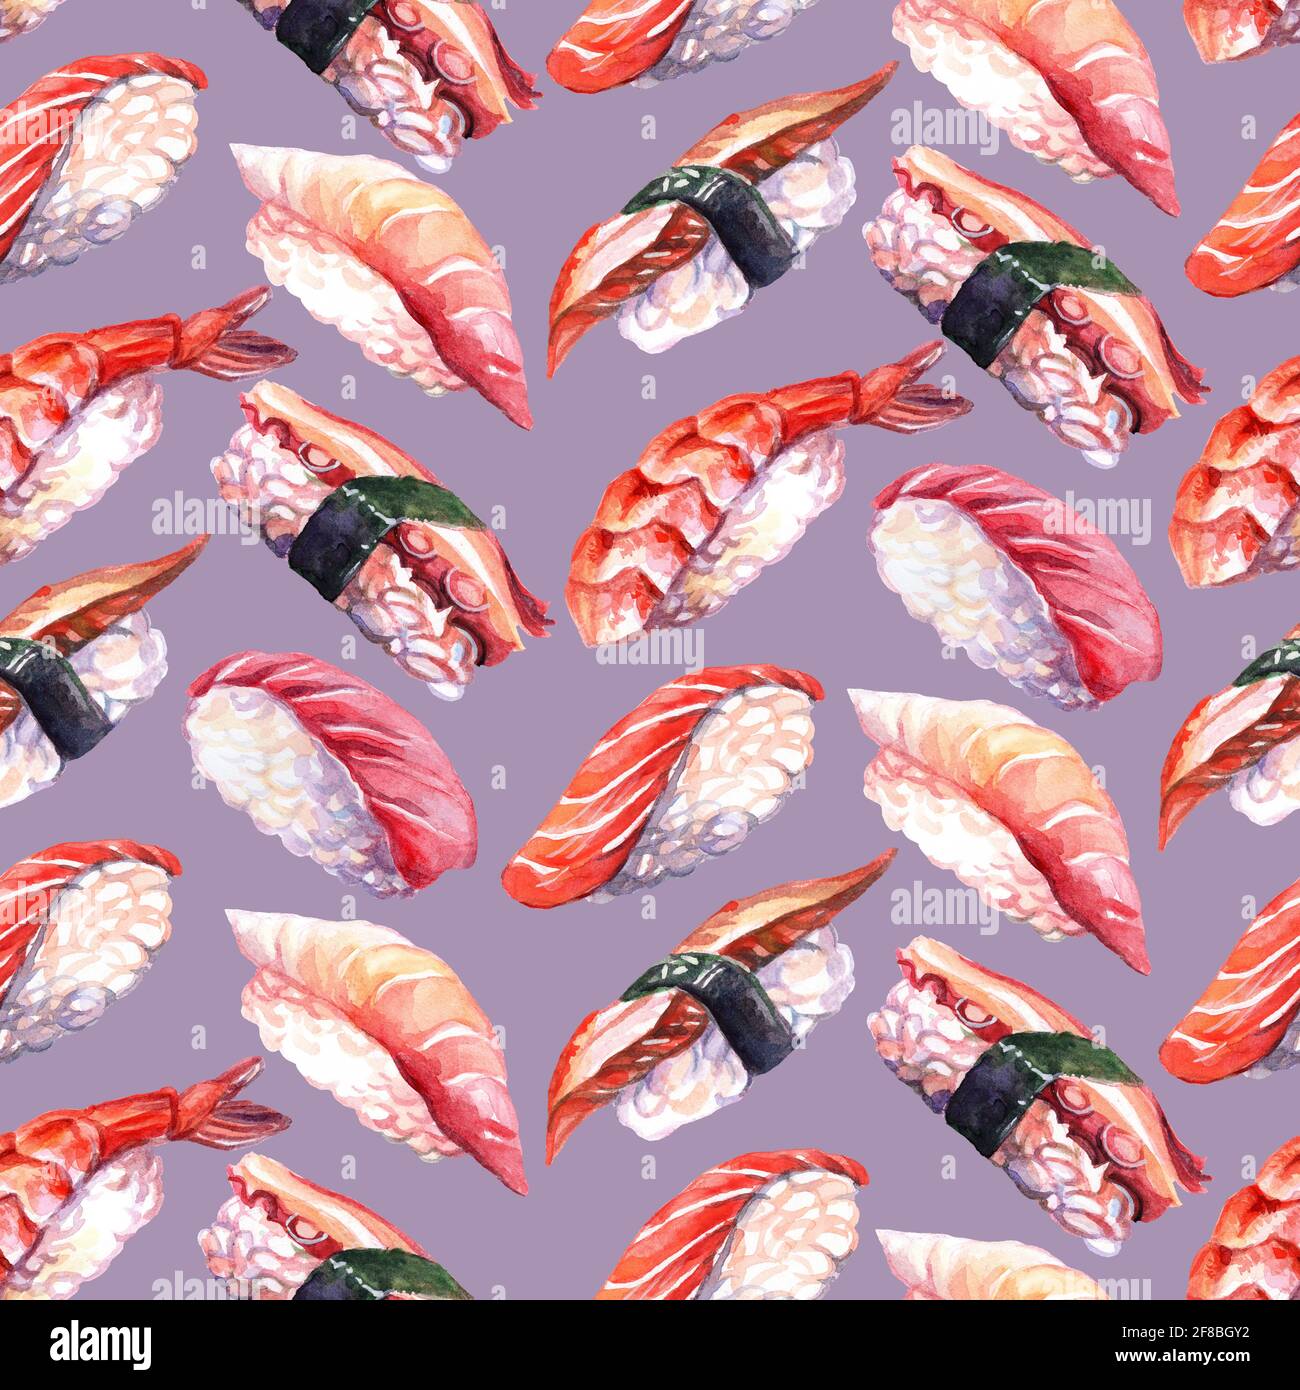 Seamless pattern japanese cuisine different sushi, watercolor illustration. Sushi background. For design sushi restaurant menu, cards, print, decor, d Stock Photo